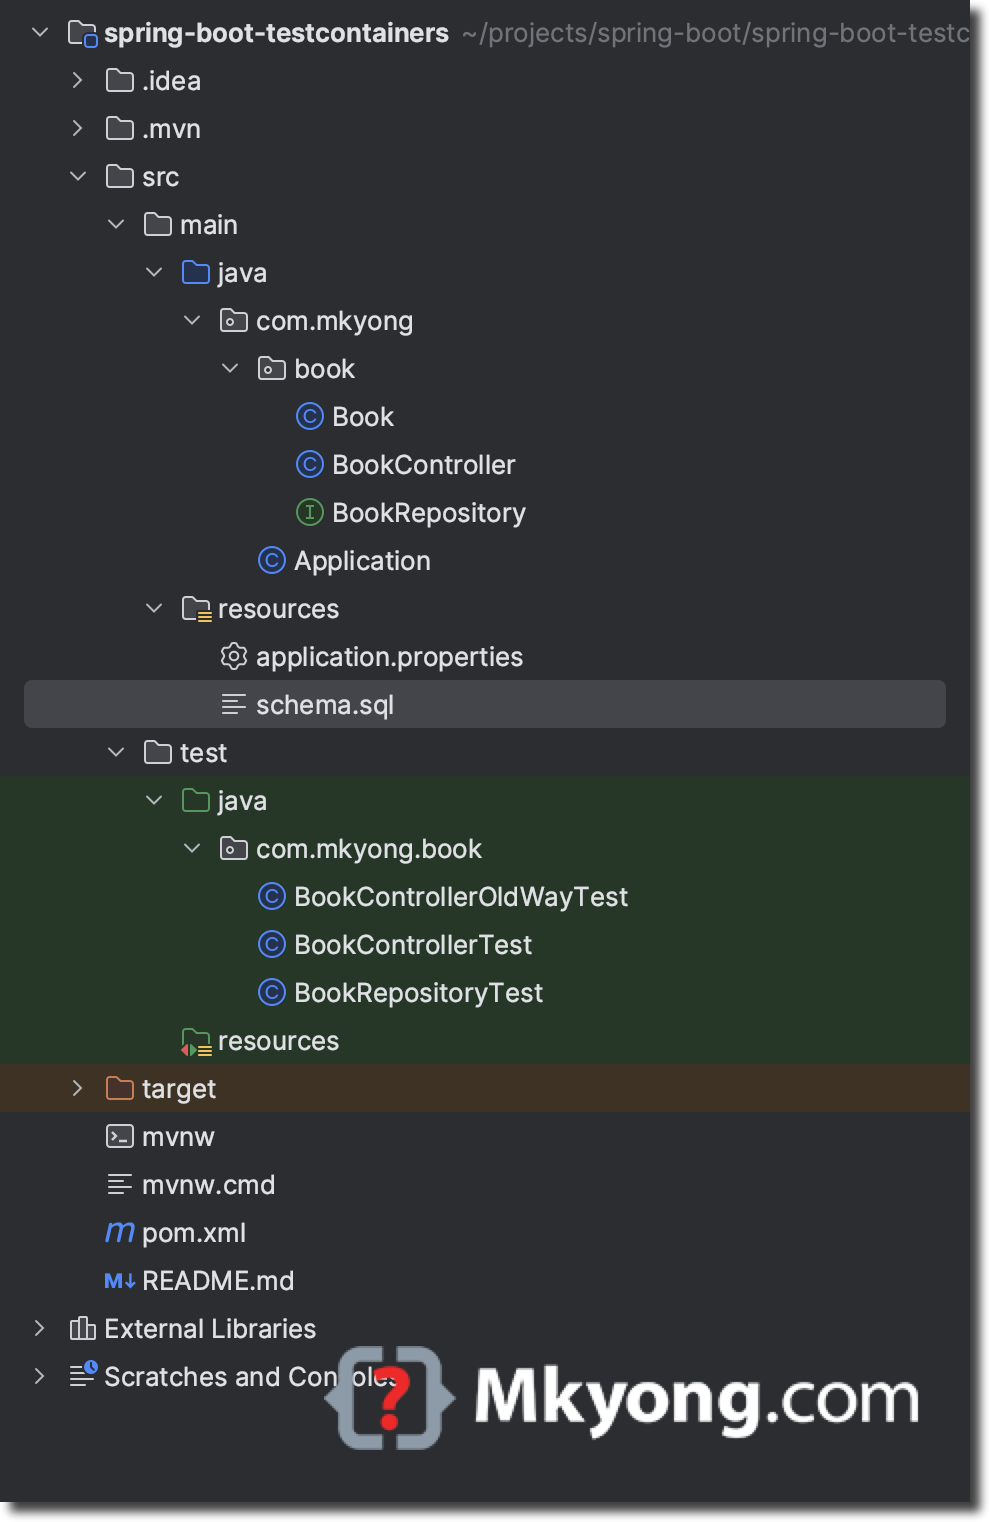 Spring Boot Testcontainers project structure